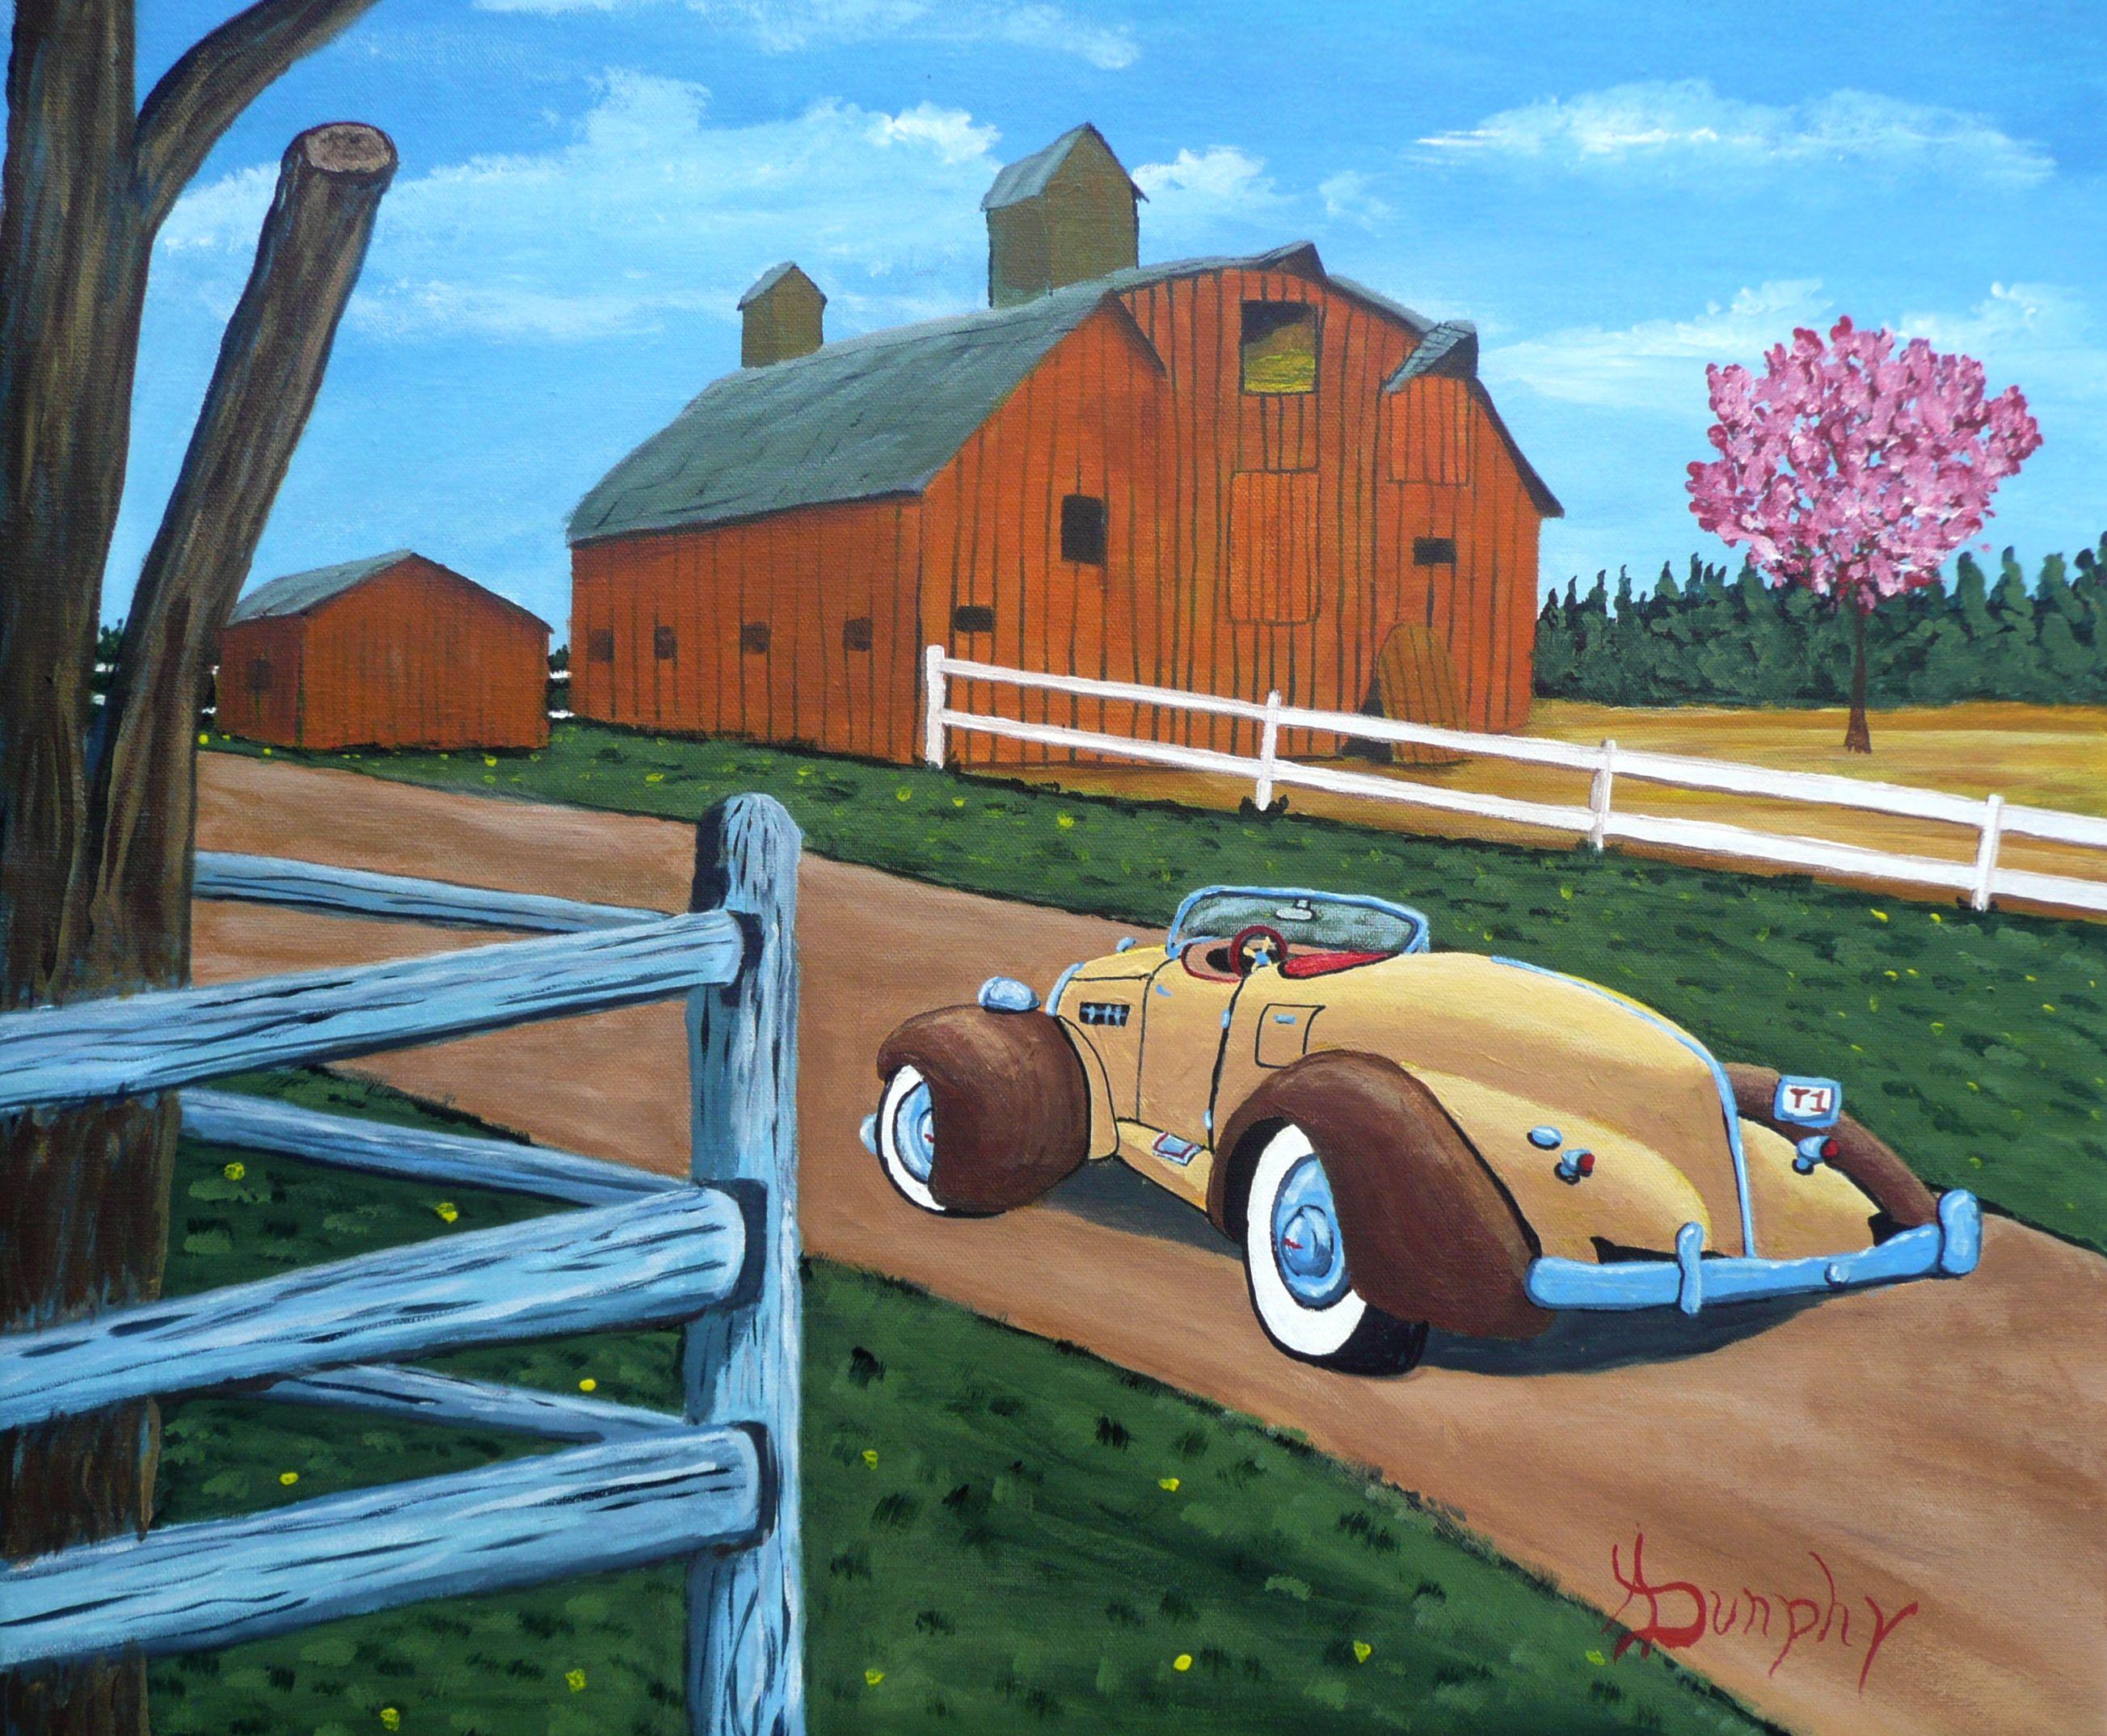 The sweeping curves of the art deco classic car are in juxtaposition with the severe lines of the austere rural constructions.   This interesting landscape is a study of form and constructions in daily life. The painting was created using all